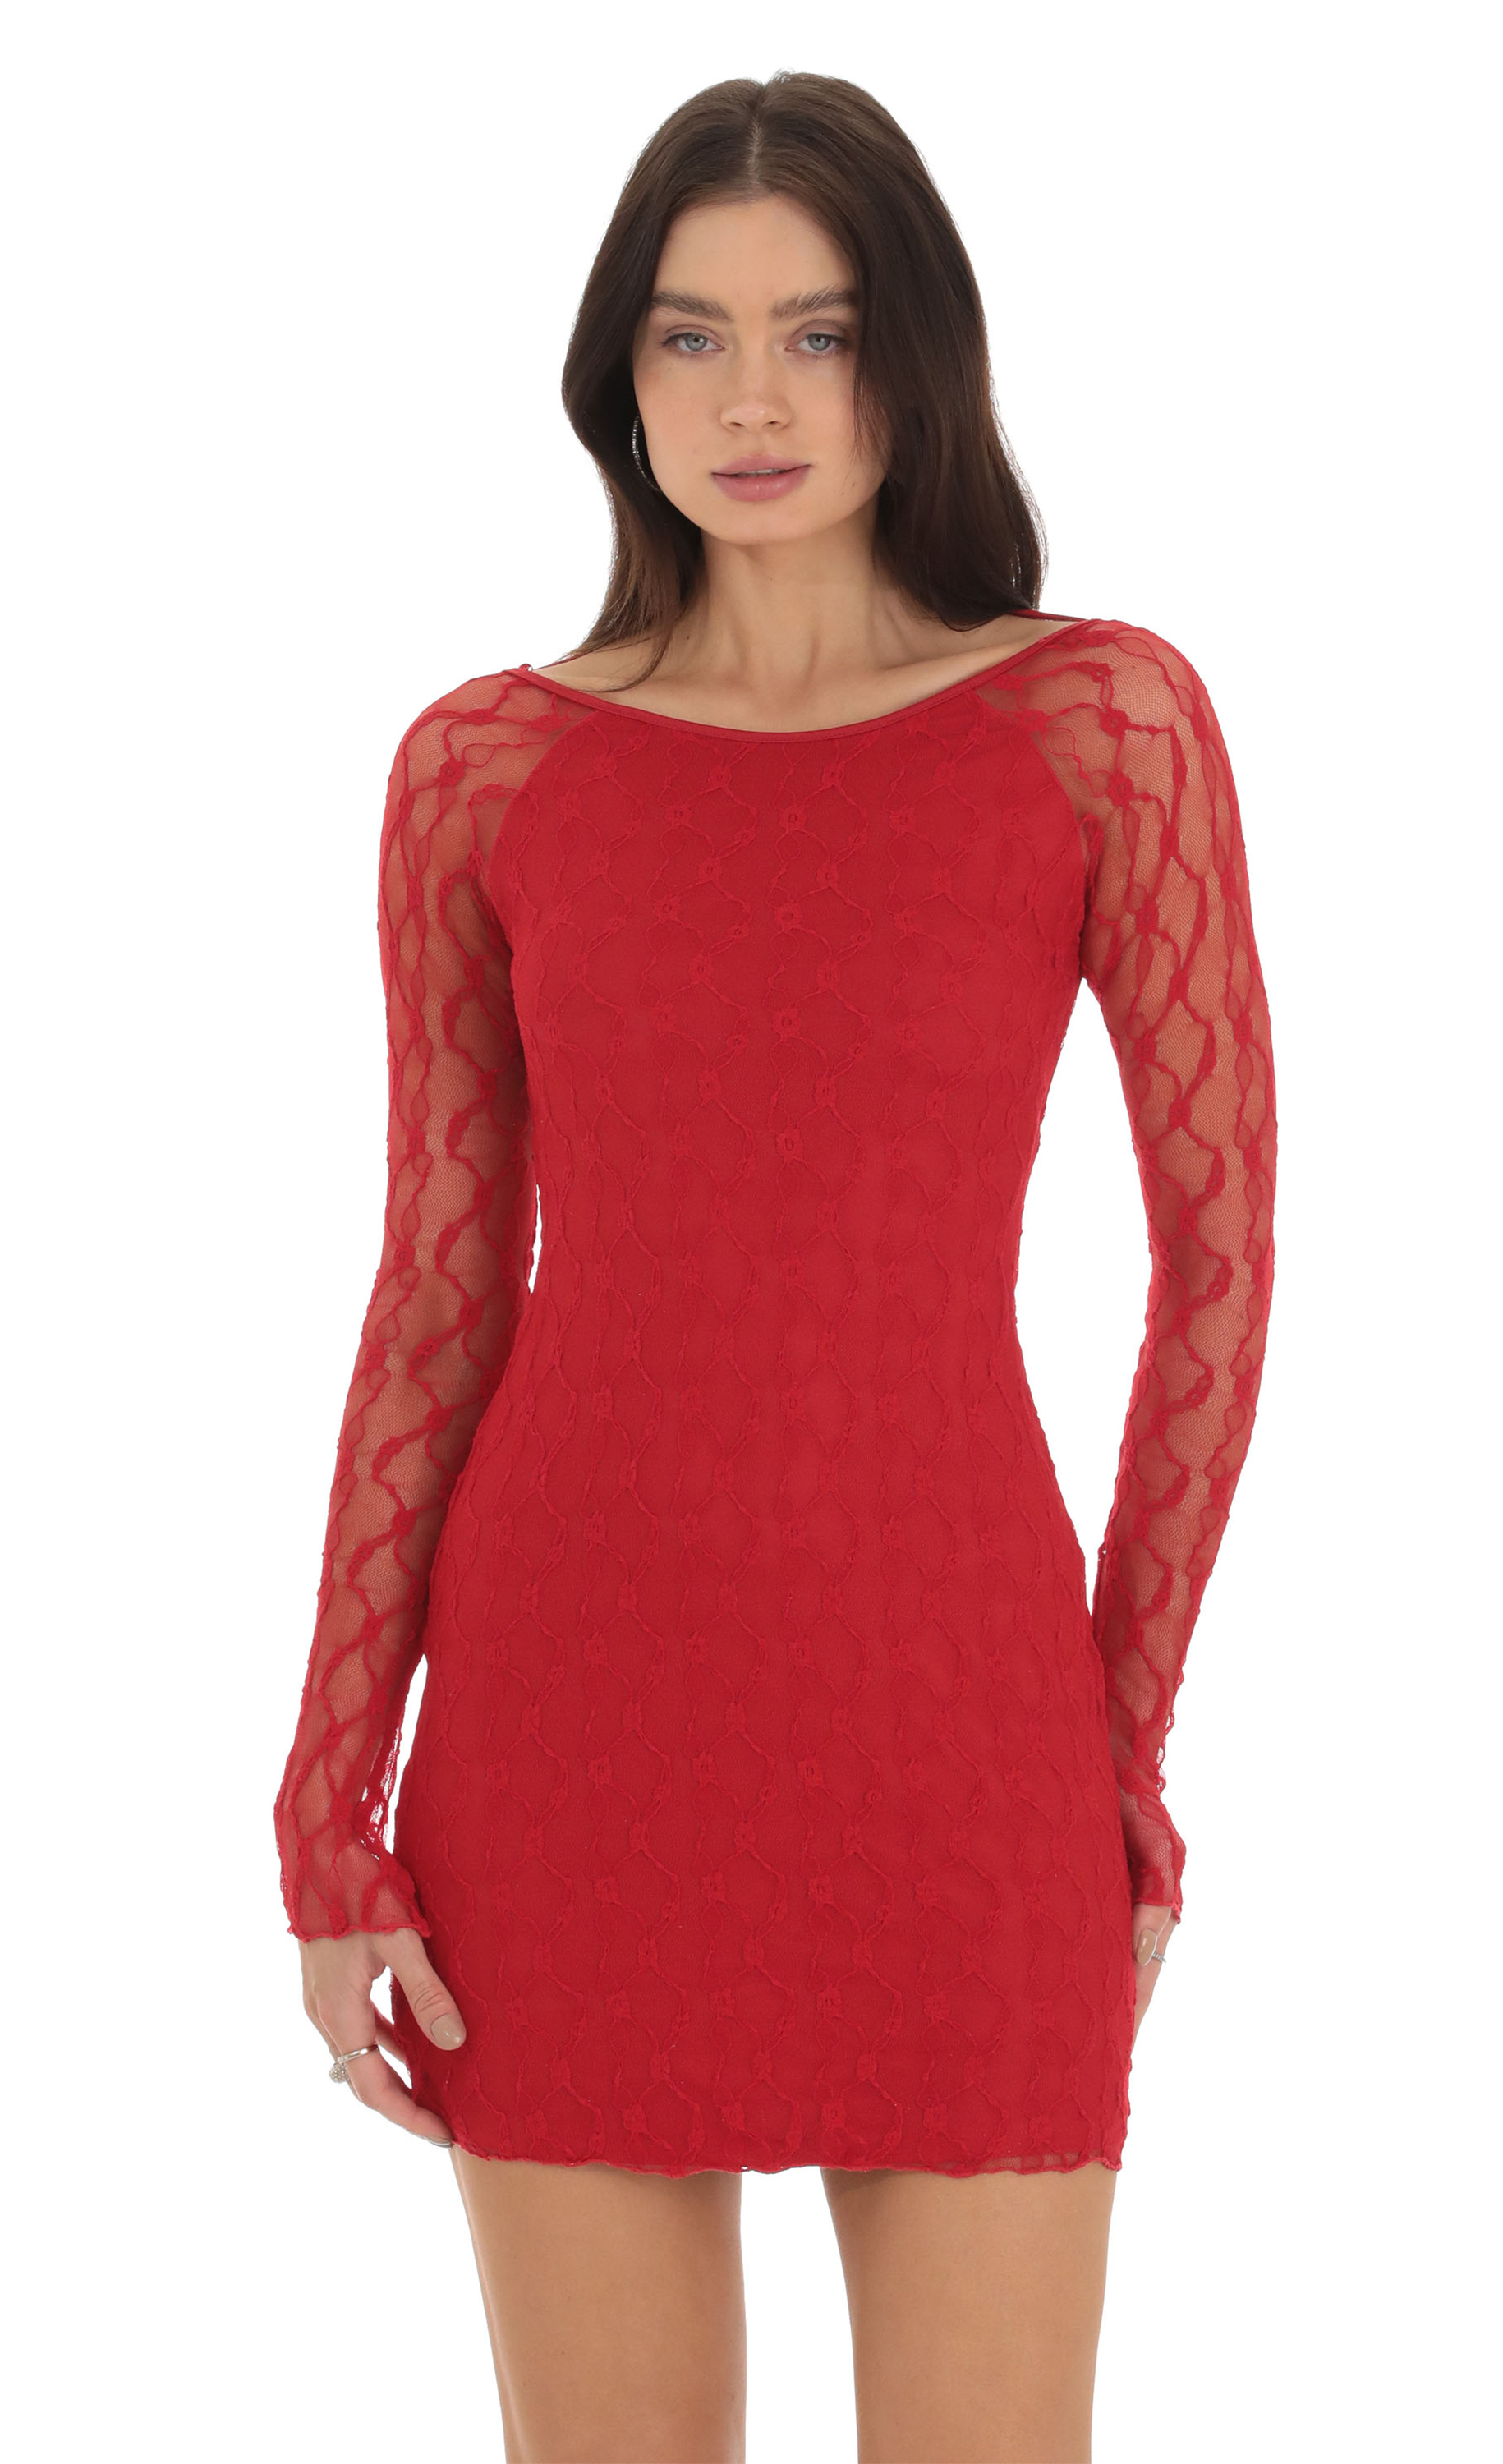 Libertee Lace Open Back Bodycon Dress in Red